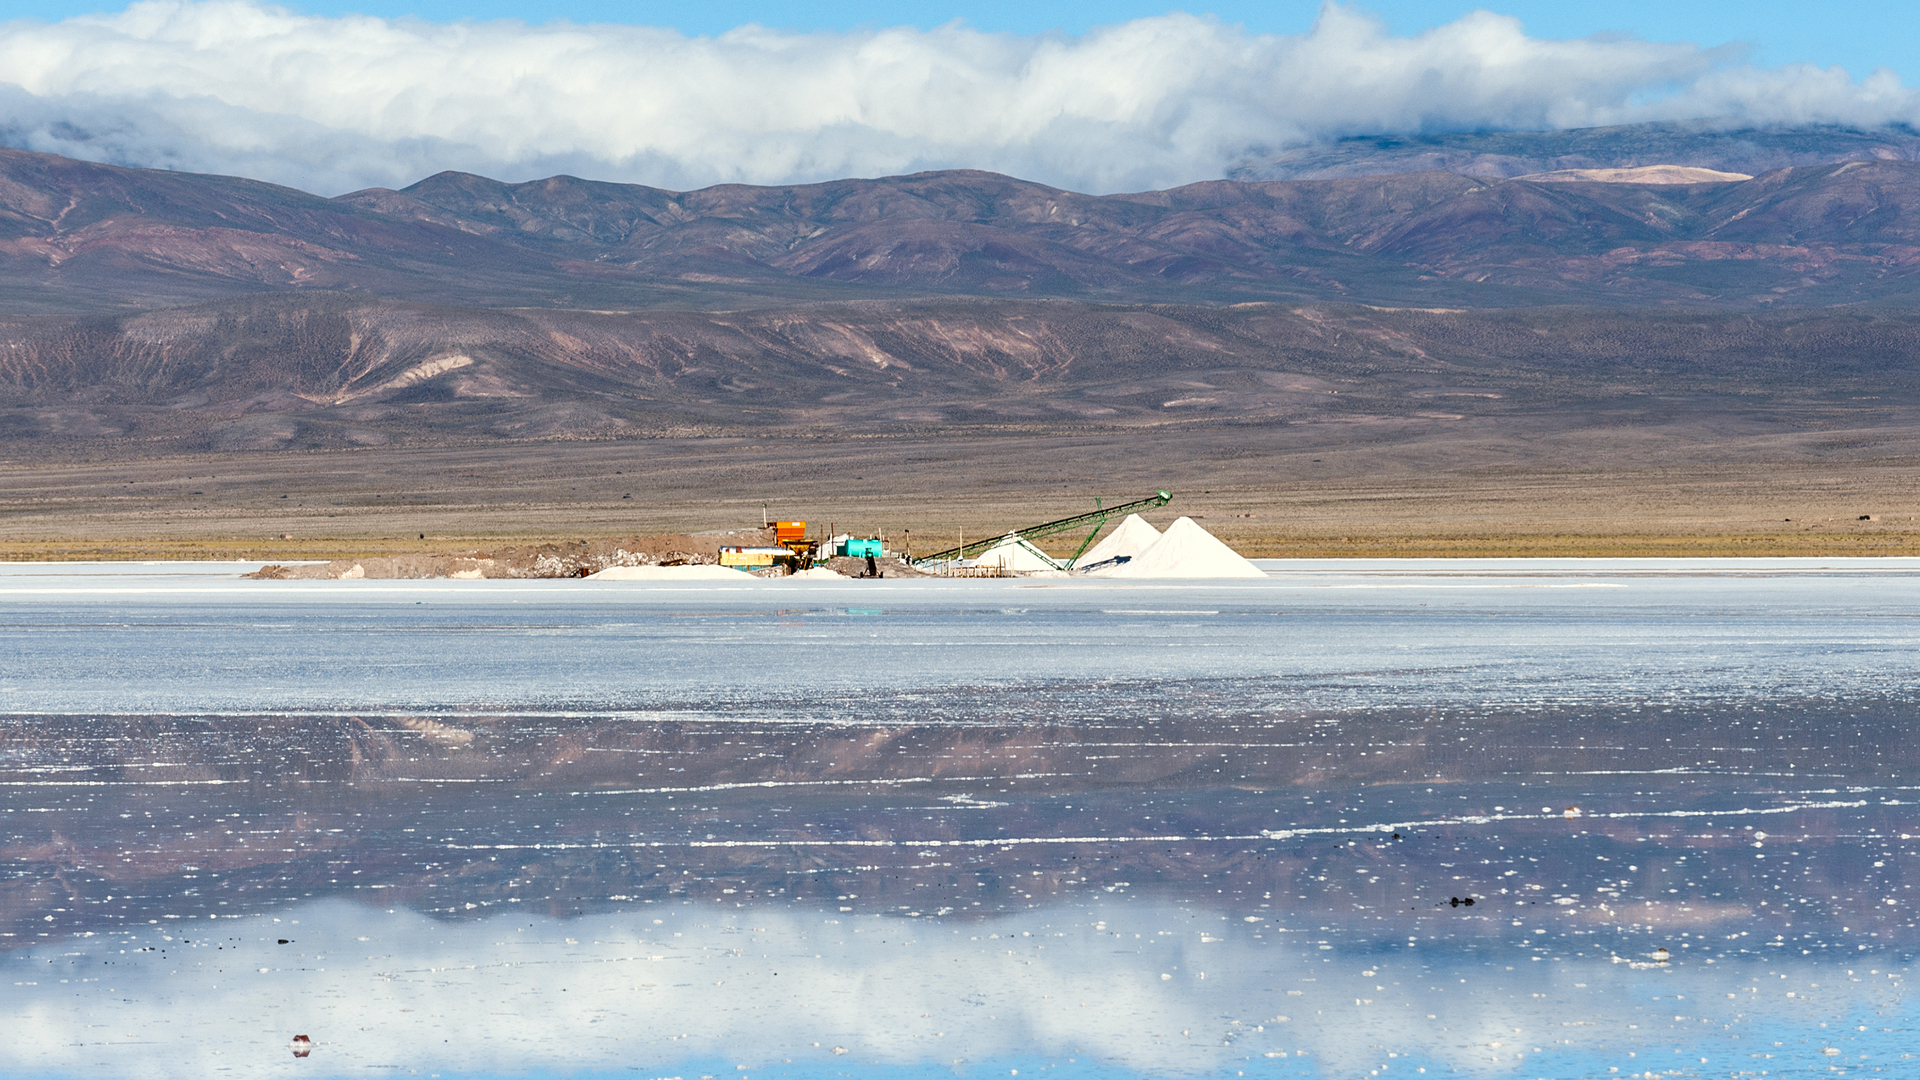 Role of Argentina’s lithium sector in the global energy transition